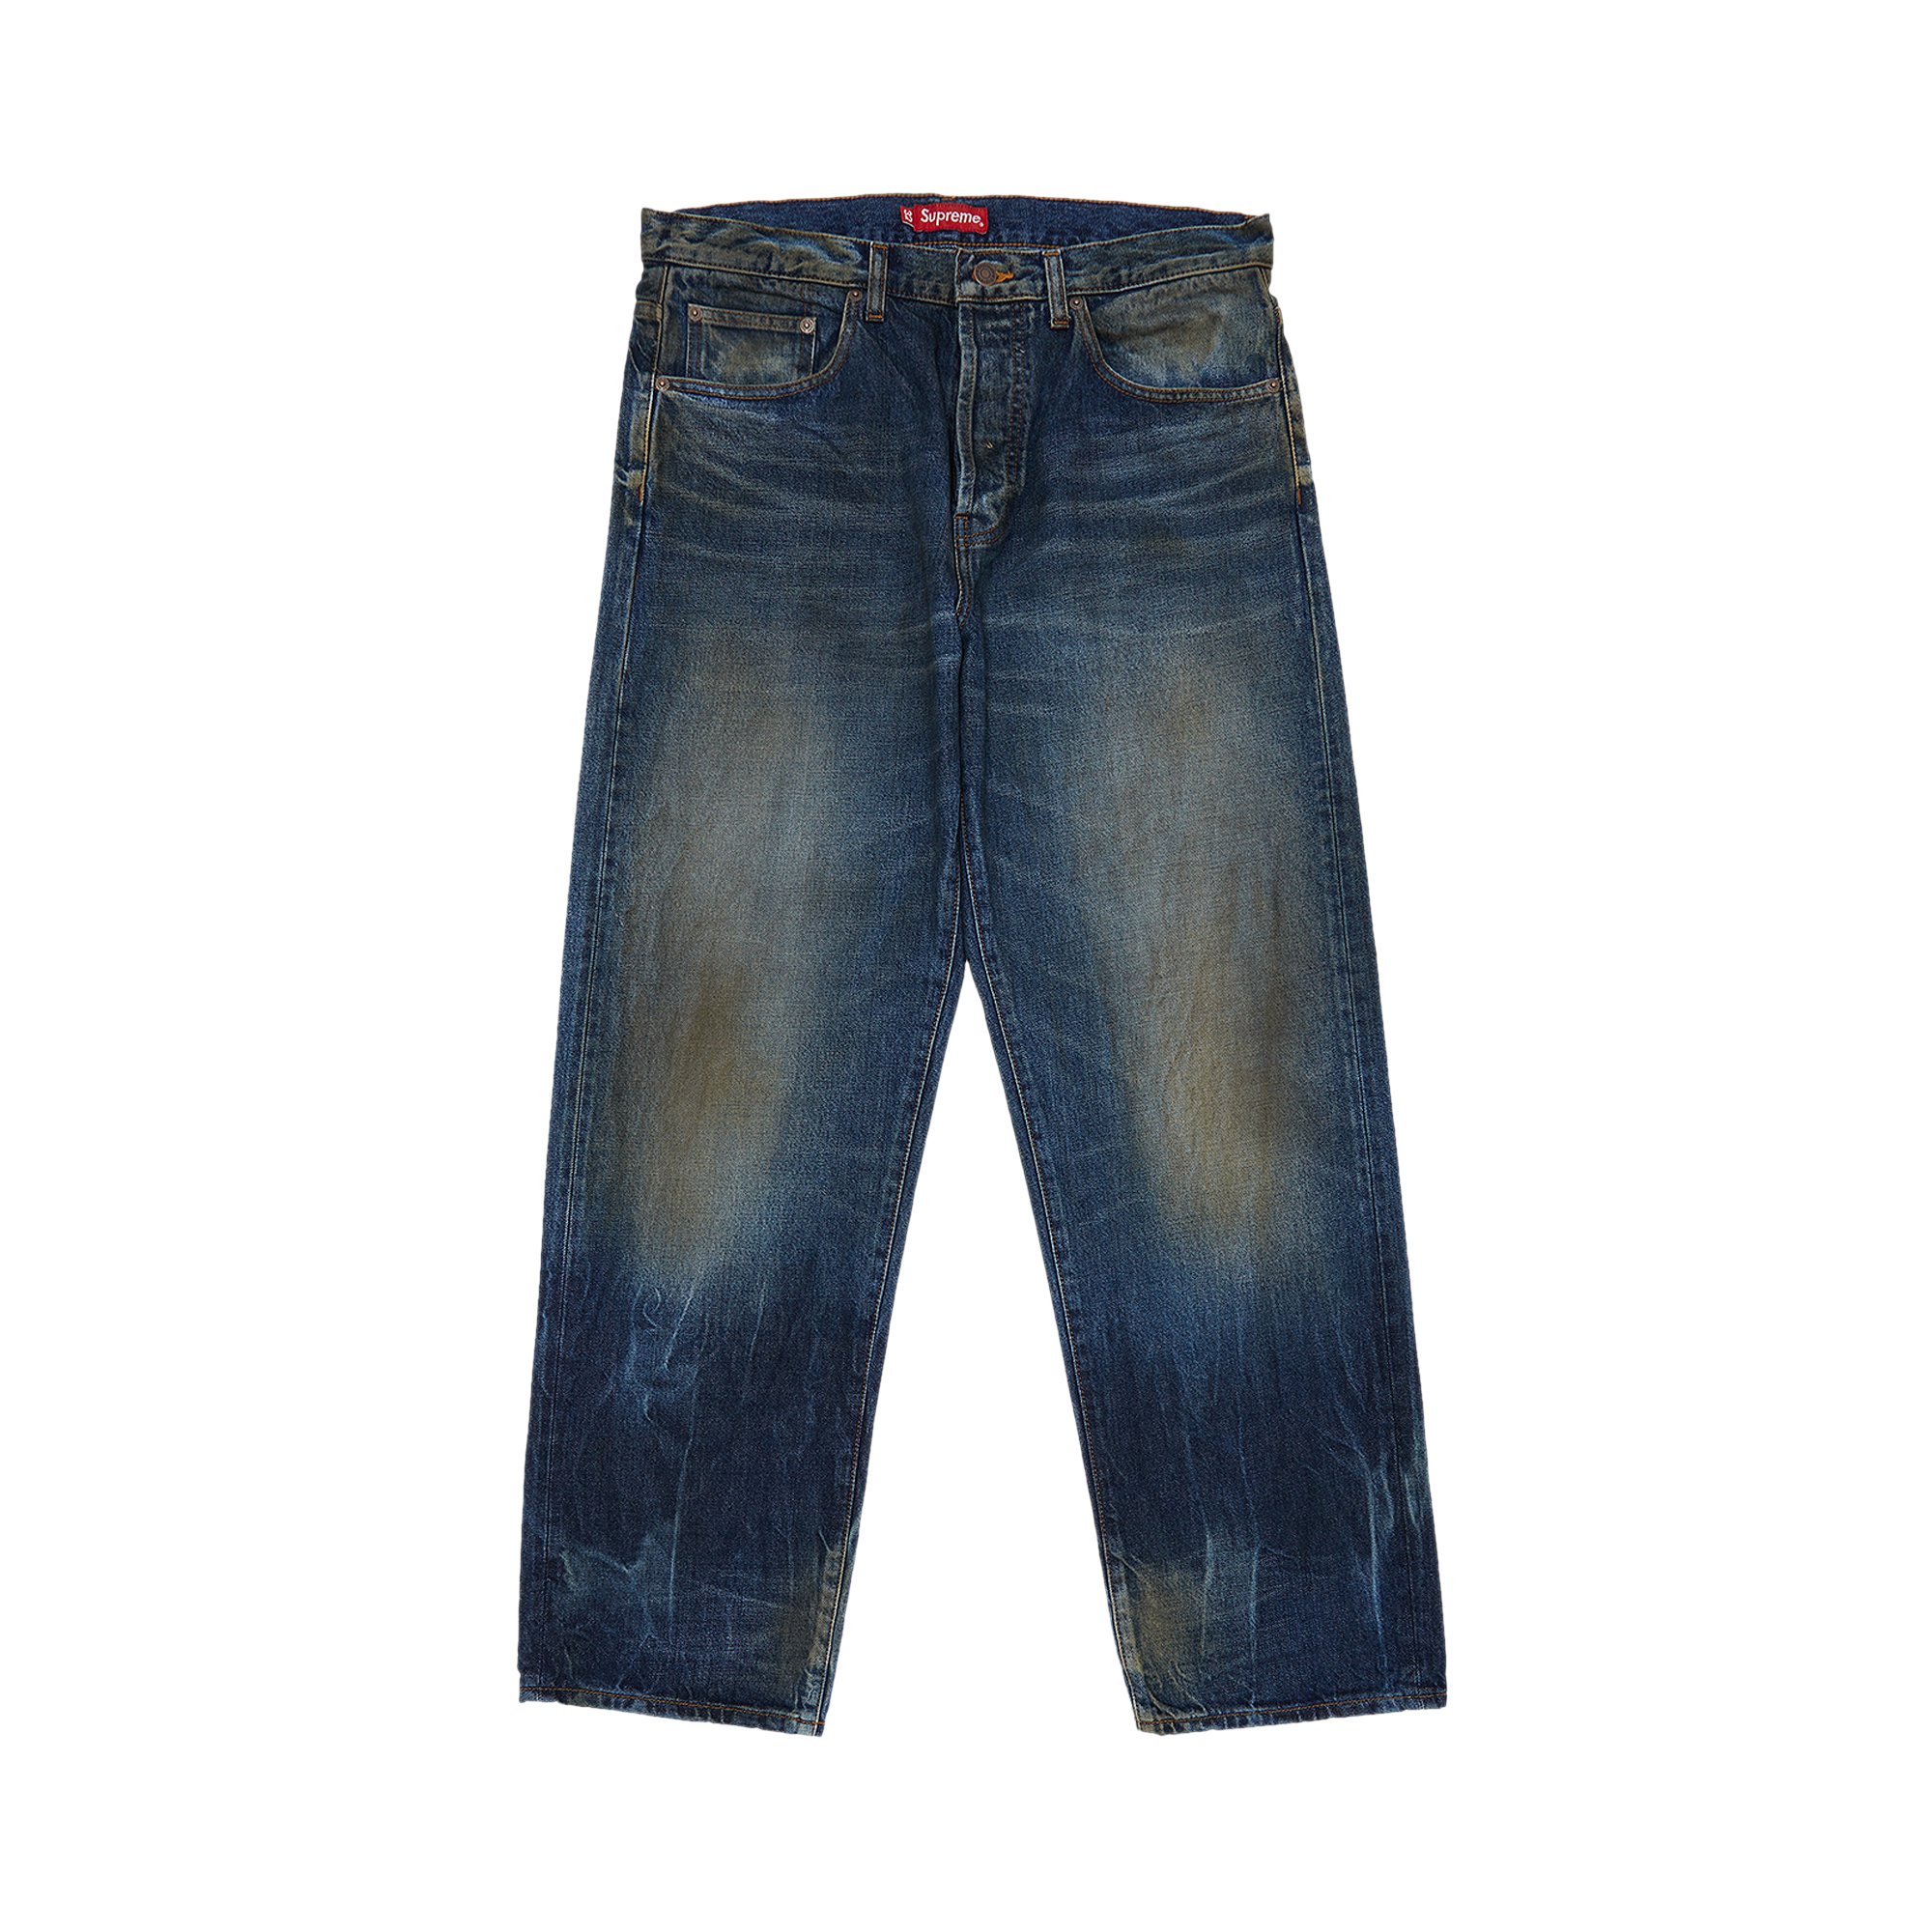 Buy Supreme Distressed Loose Fit Selvedge Jean 'Washed Blue ...